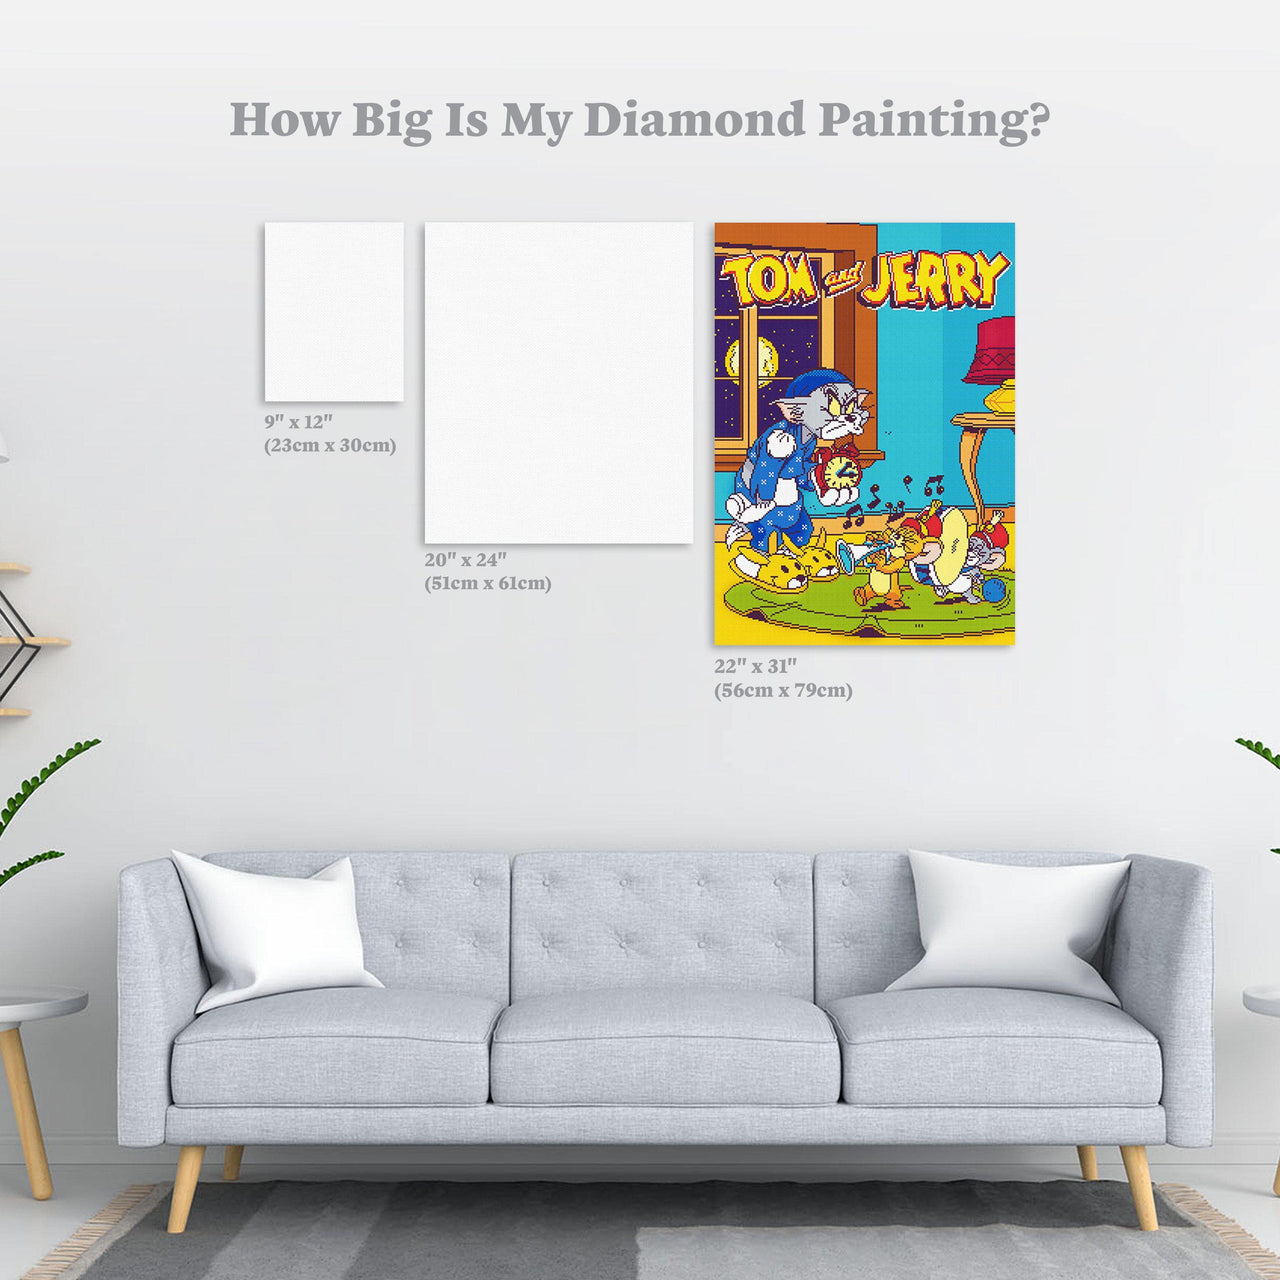 Diamond Painting Morning Music 22" x 31″ (56cm x 79cm) / Round With 25 Colors Including 4 ABs / 55,919